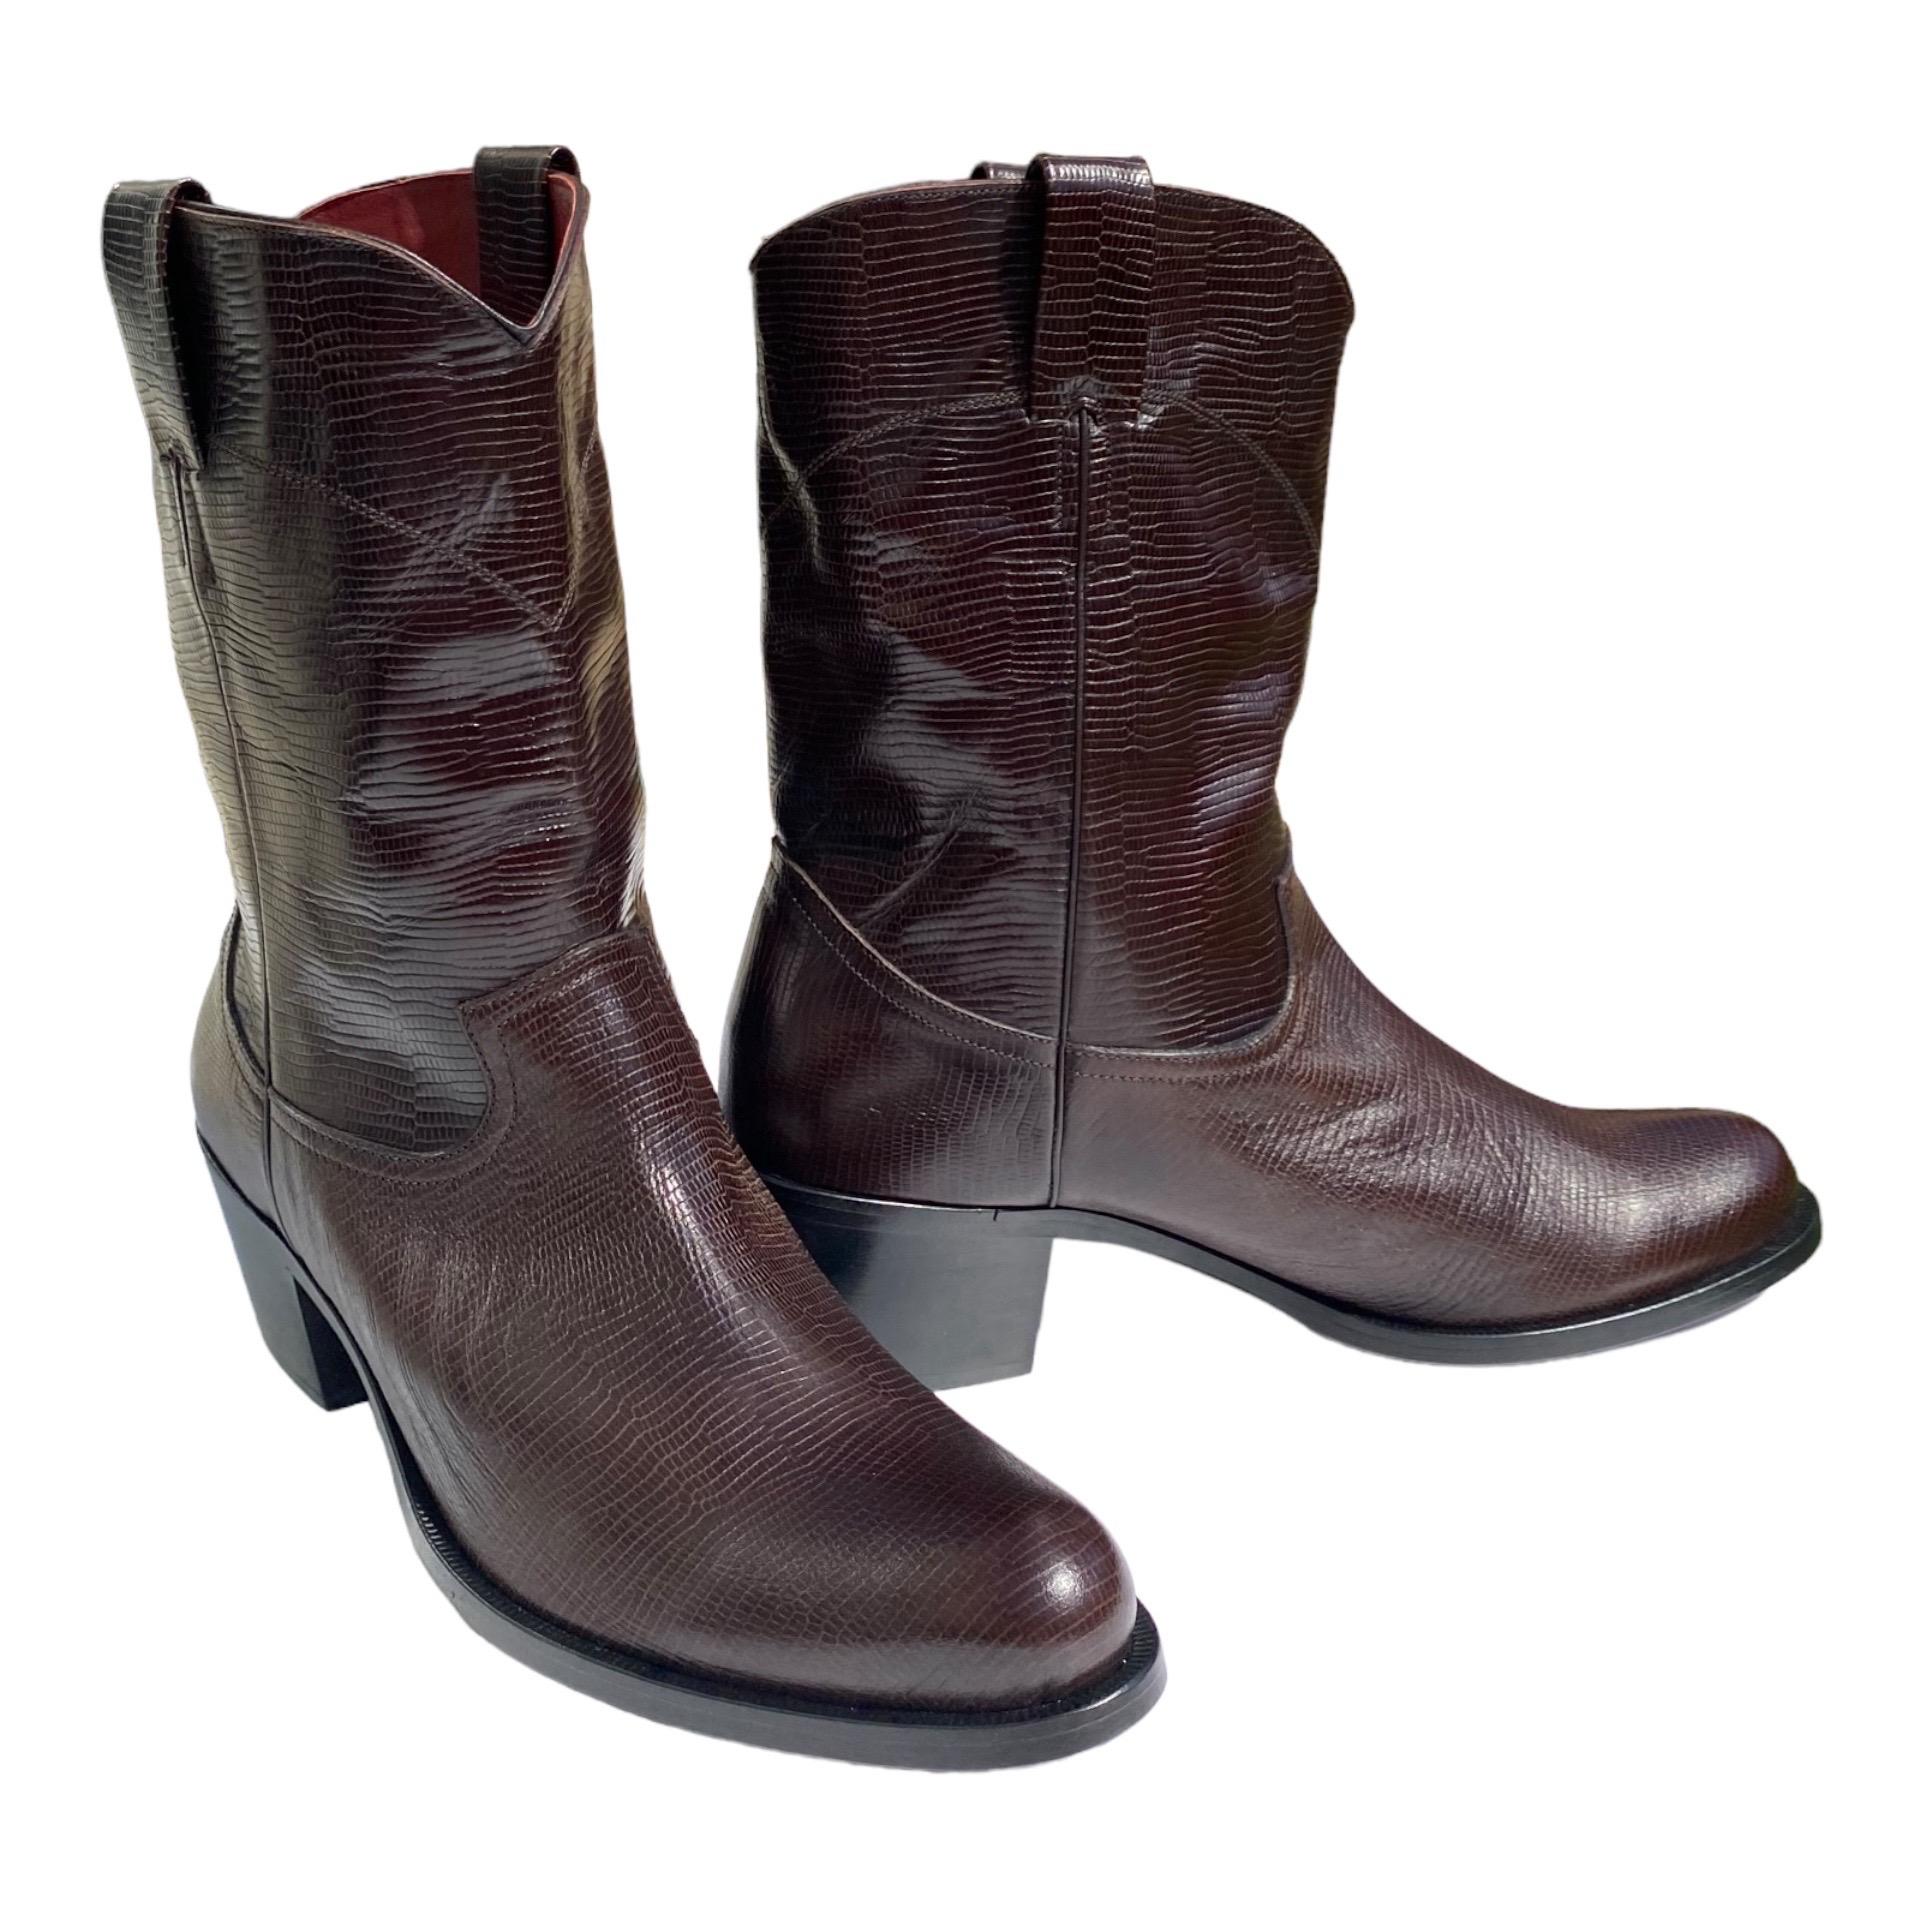 NWT Roberto Cavalli Men's Western Boots
Italian Size is 43.5 - US 10.5
Color: Brown
Lizard print leather, Lining in Burgundy leather, Leather sole with logo.
Made in Italy.
New with box.


 